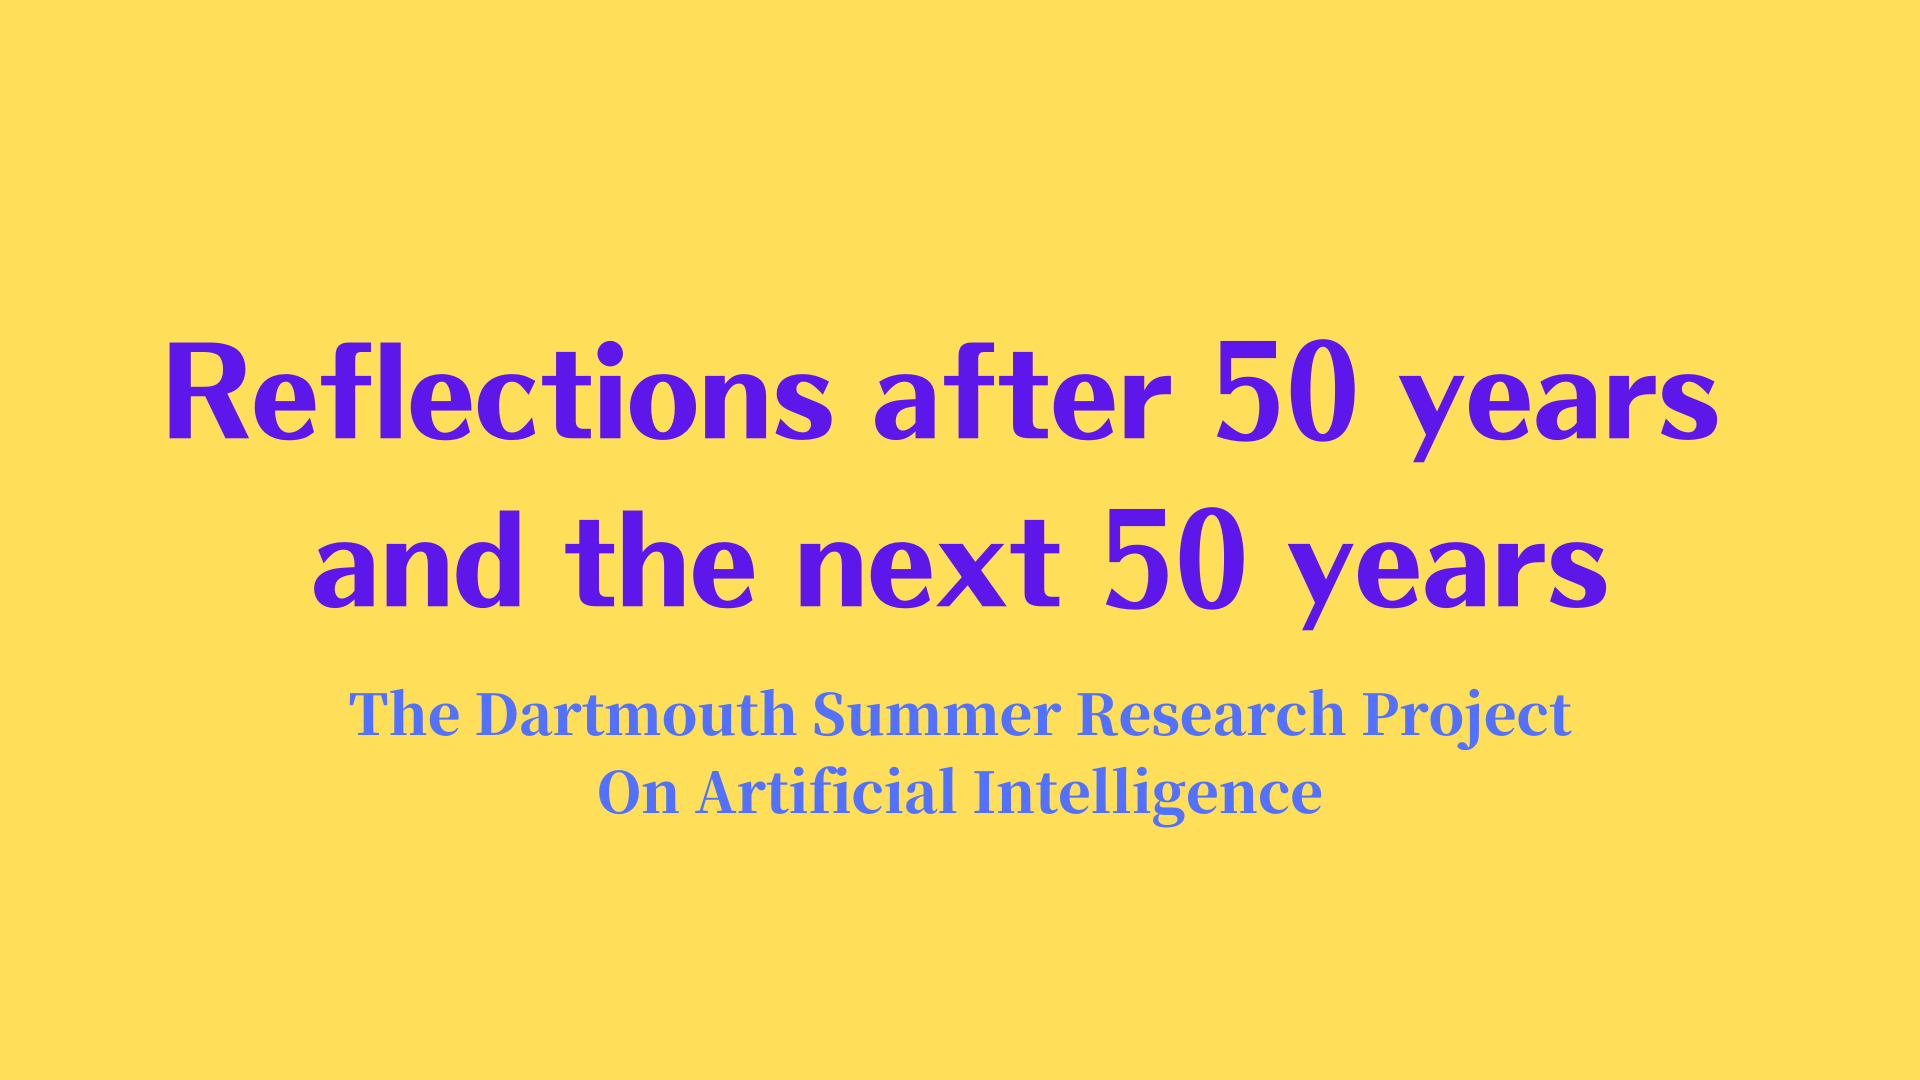 Dartmouth Conference, AI in 1956 and Reflections After 50 Years